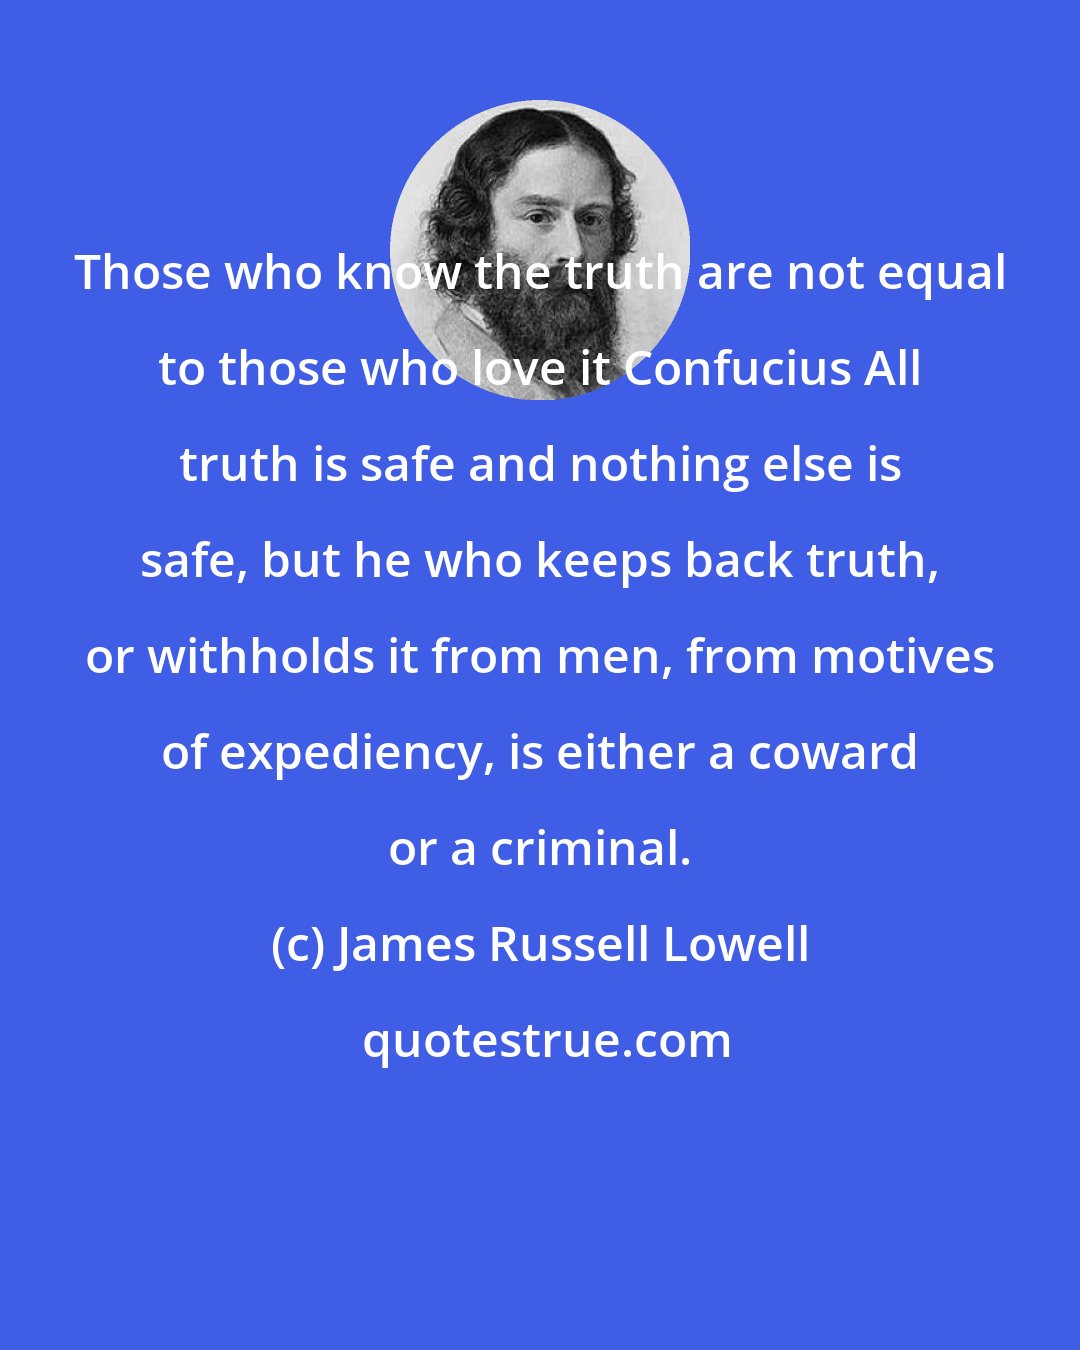 James Russell Lowell: Those who know the truth are not equal to those who love it Confucius All truth is safe and nothing else is safe, but he who keeps back truth, or withholds it from men, from motives of expediency, is either a coward or a criminal.